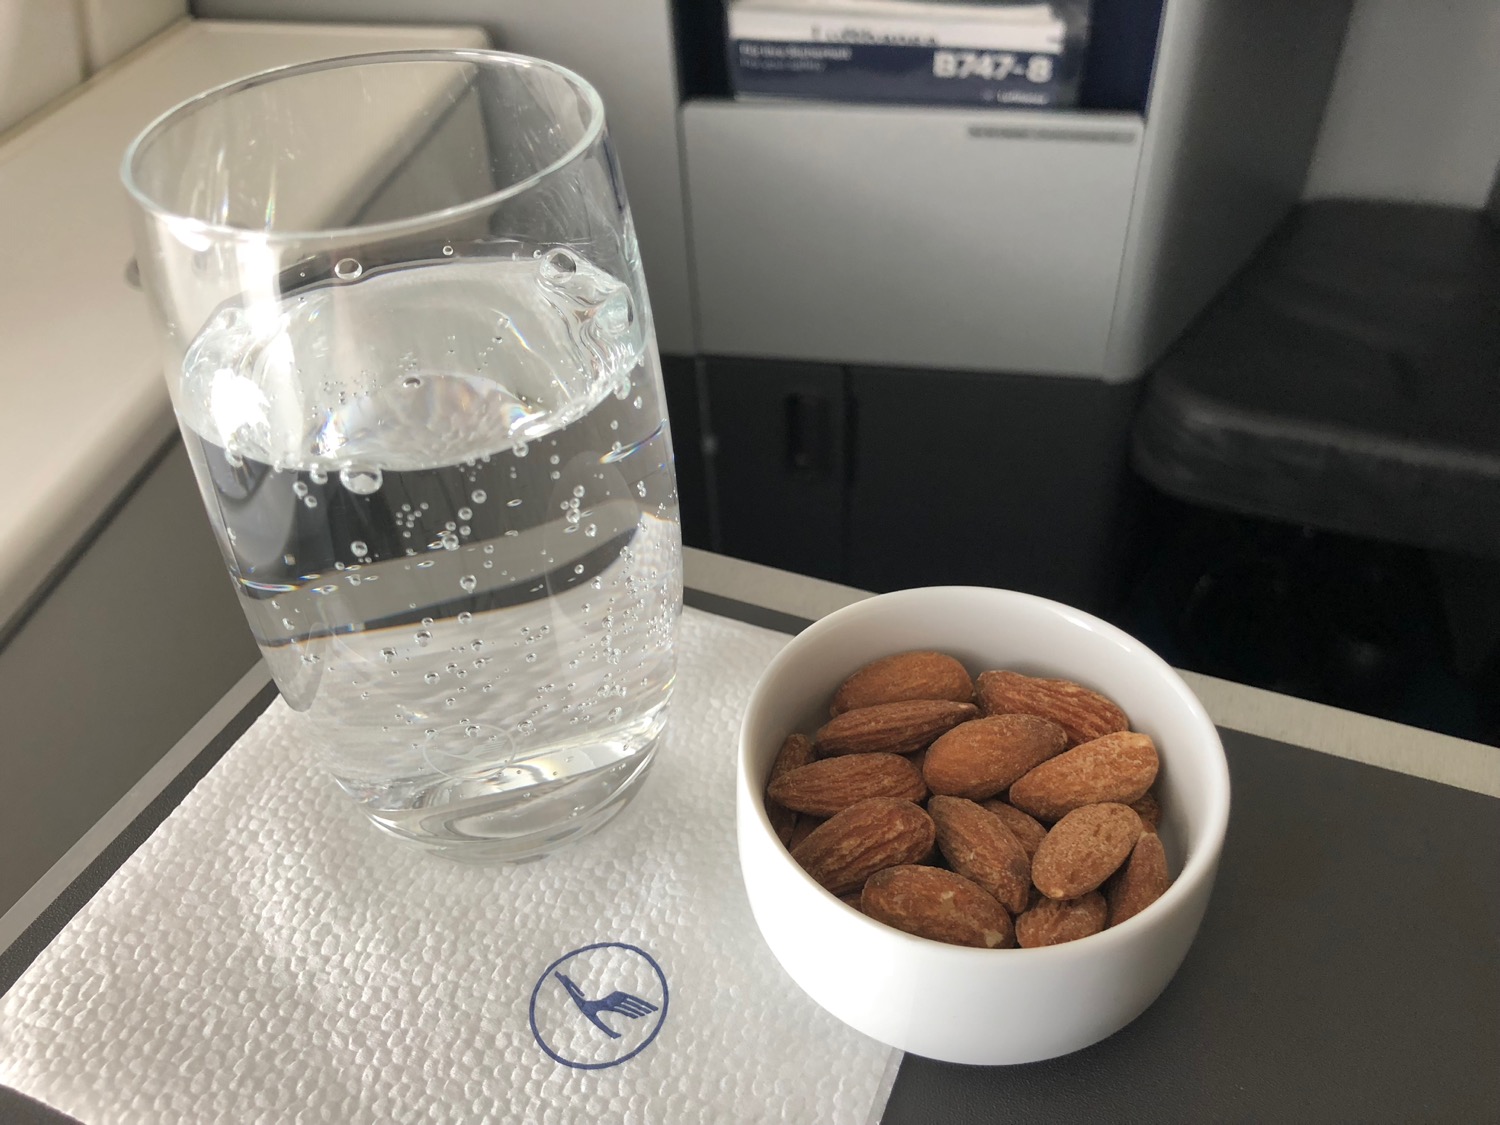 a bowl of almonds and a glass of water on a table